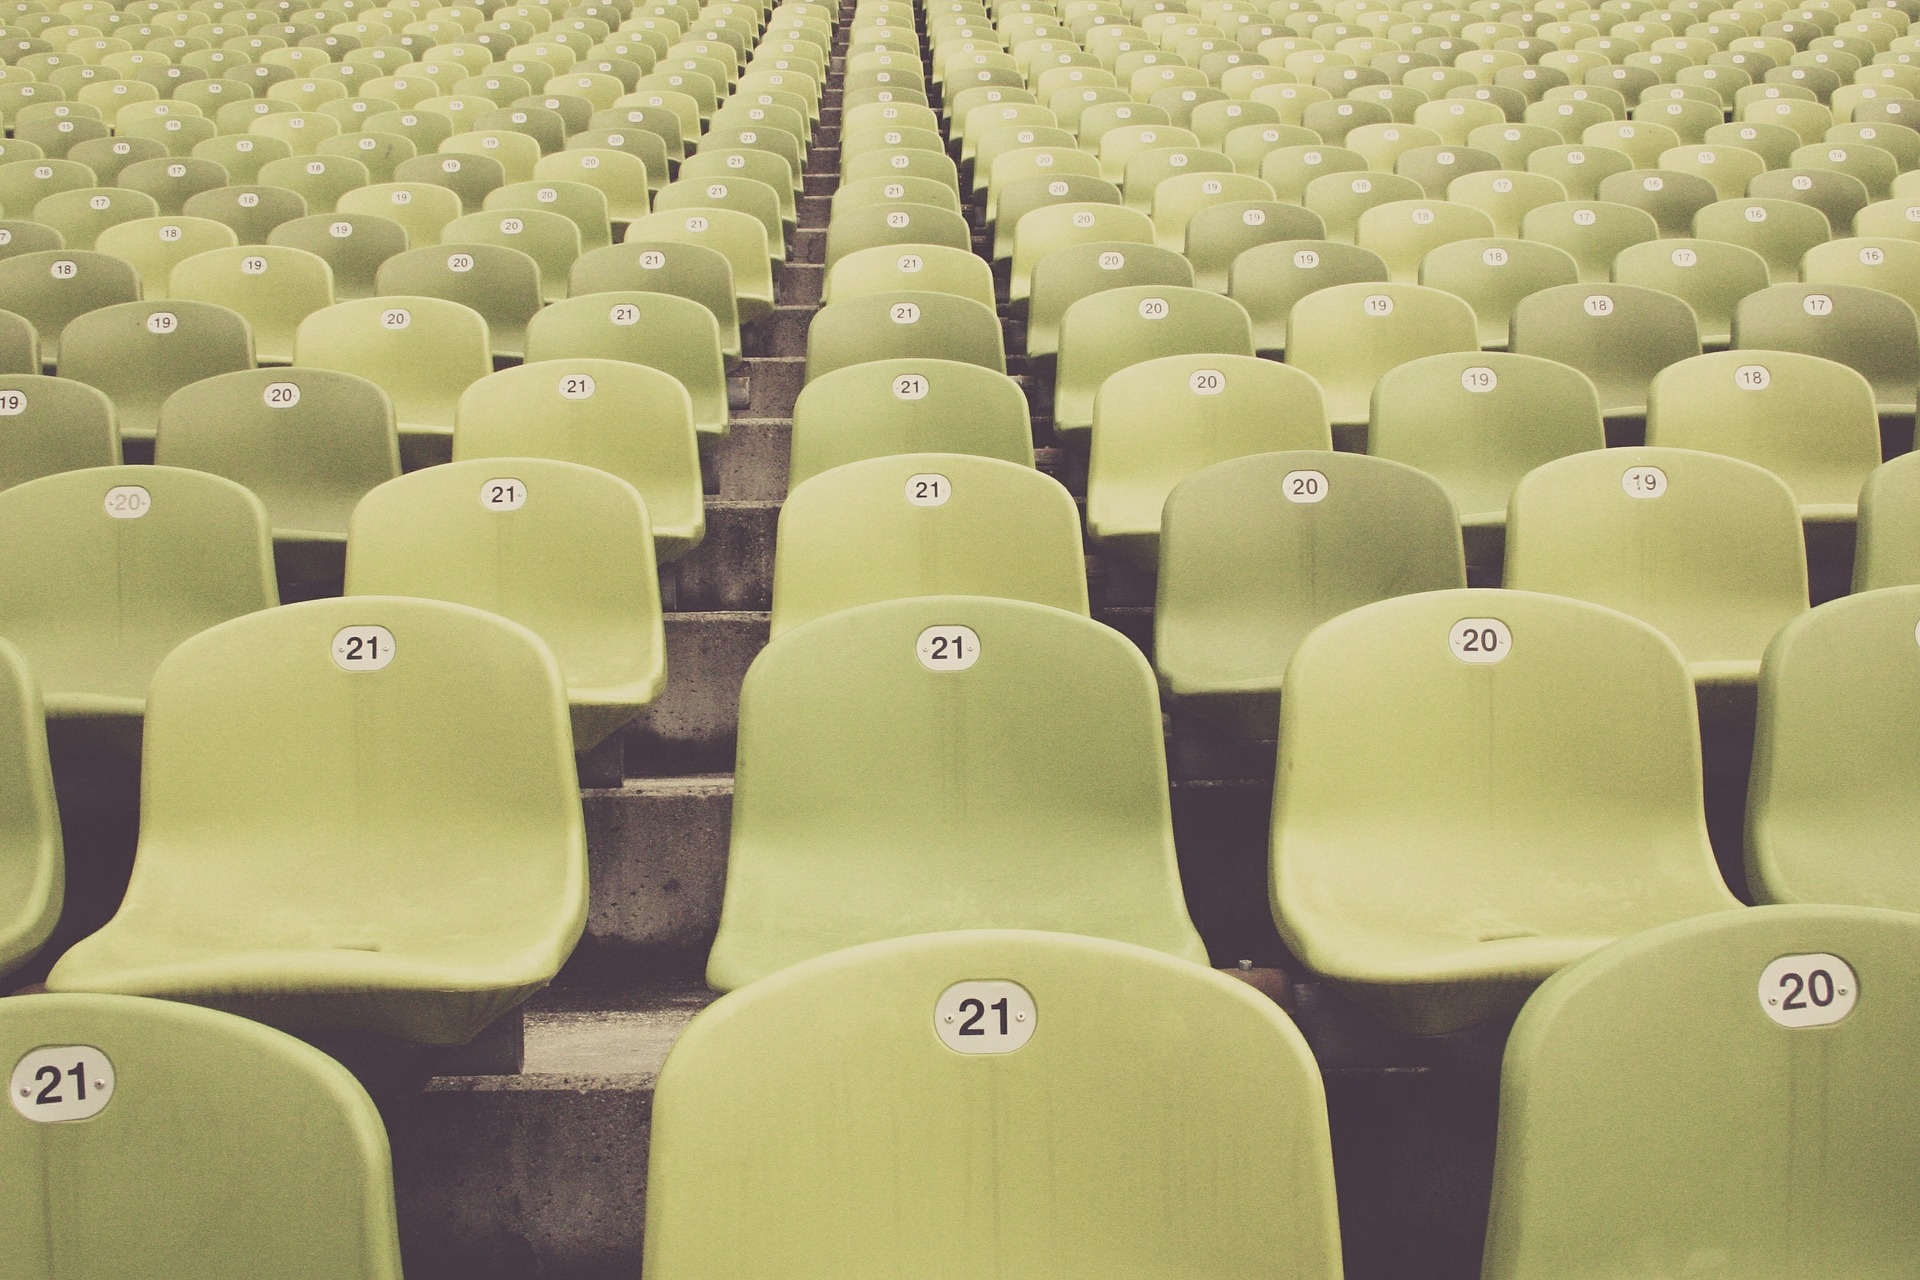 The Top 8 Inexpensive Tactics Sure to Get Butts in Seats